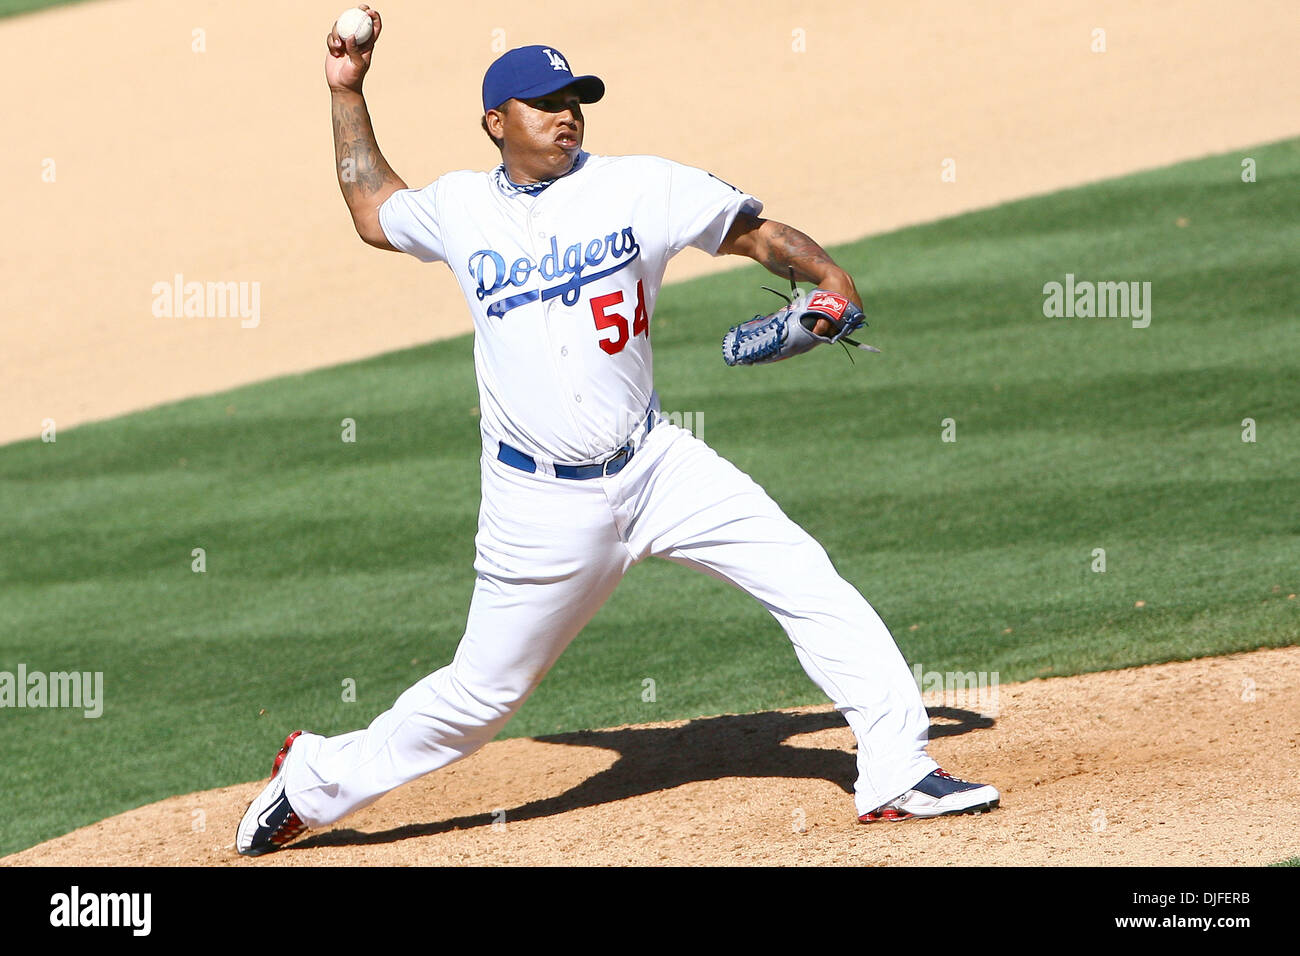 06 Jun 2010: Los Angeles Dodger relief pitcher Ronald Bellisario makes a  pitch during the top of the tenth inning. Bellisario retired the side, as  the game would go on to extra